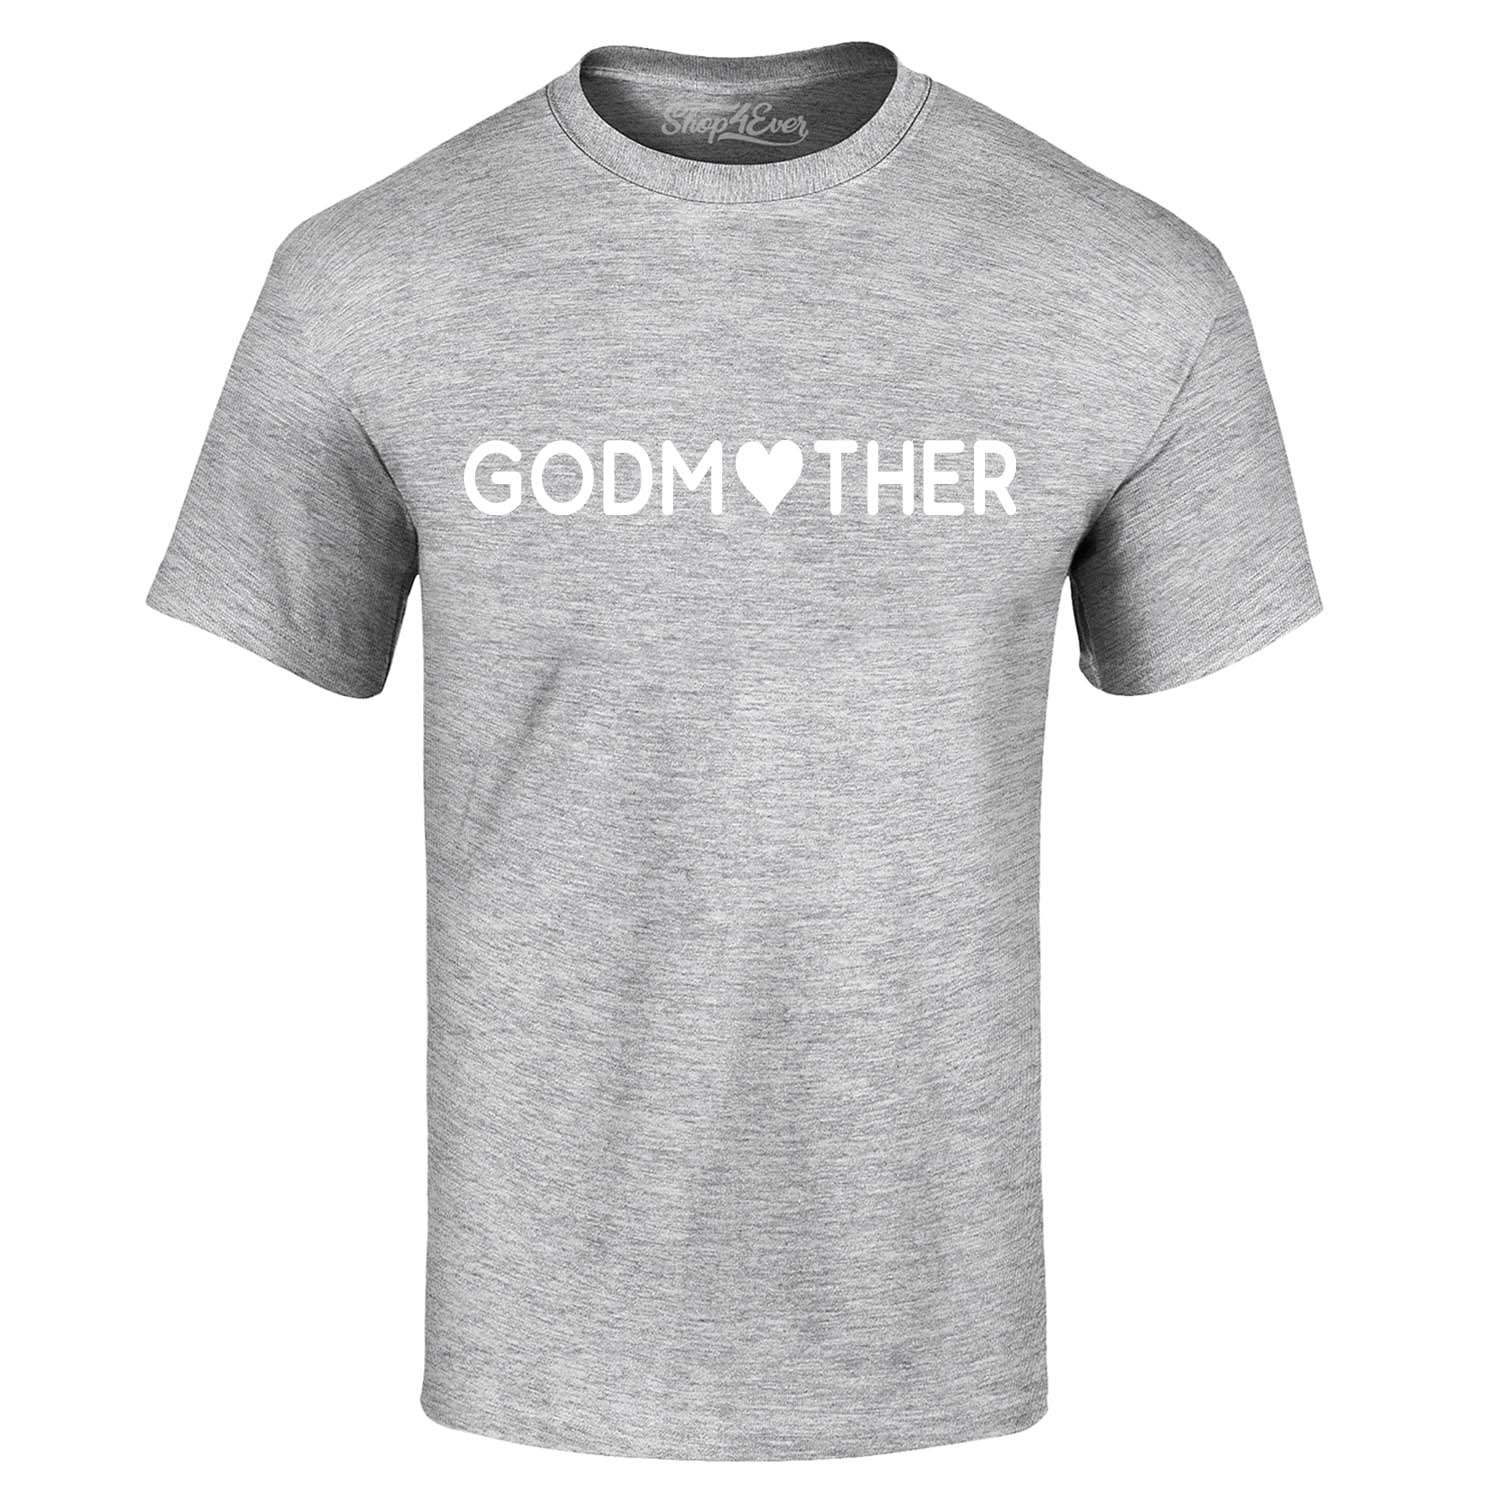 Godmother Mothers Day Gifts Baptism Shirt Gift Godmother T-Shirt The Godmother Shirt Mothers Day Shirt Fairy Mother Shirt